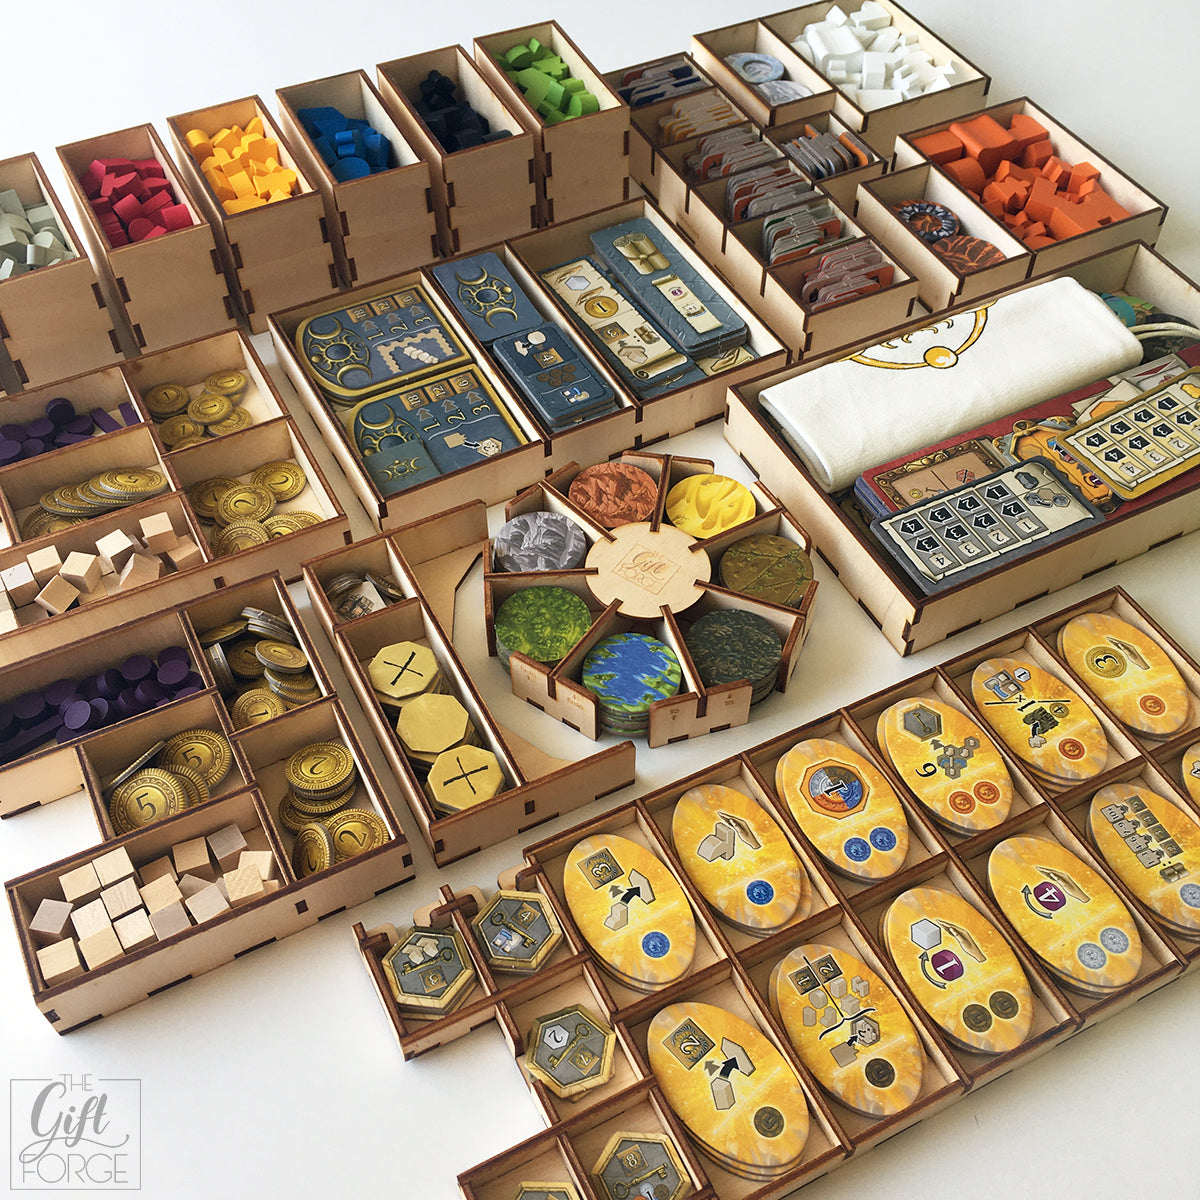 Insert compatible with Terra Mystica